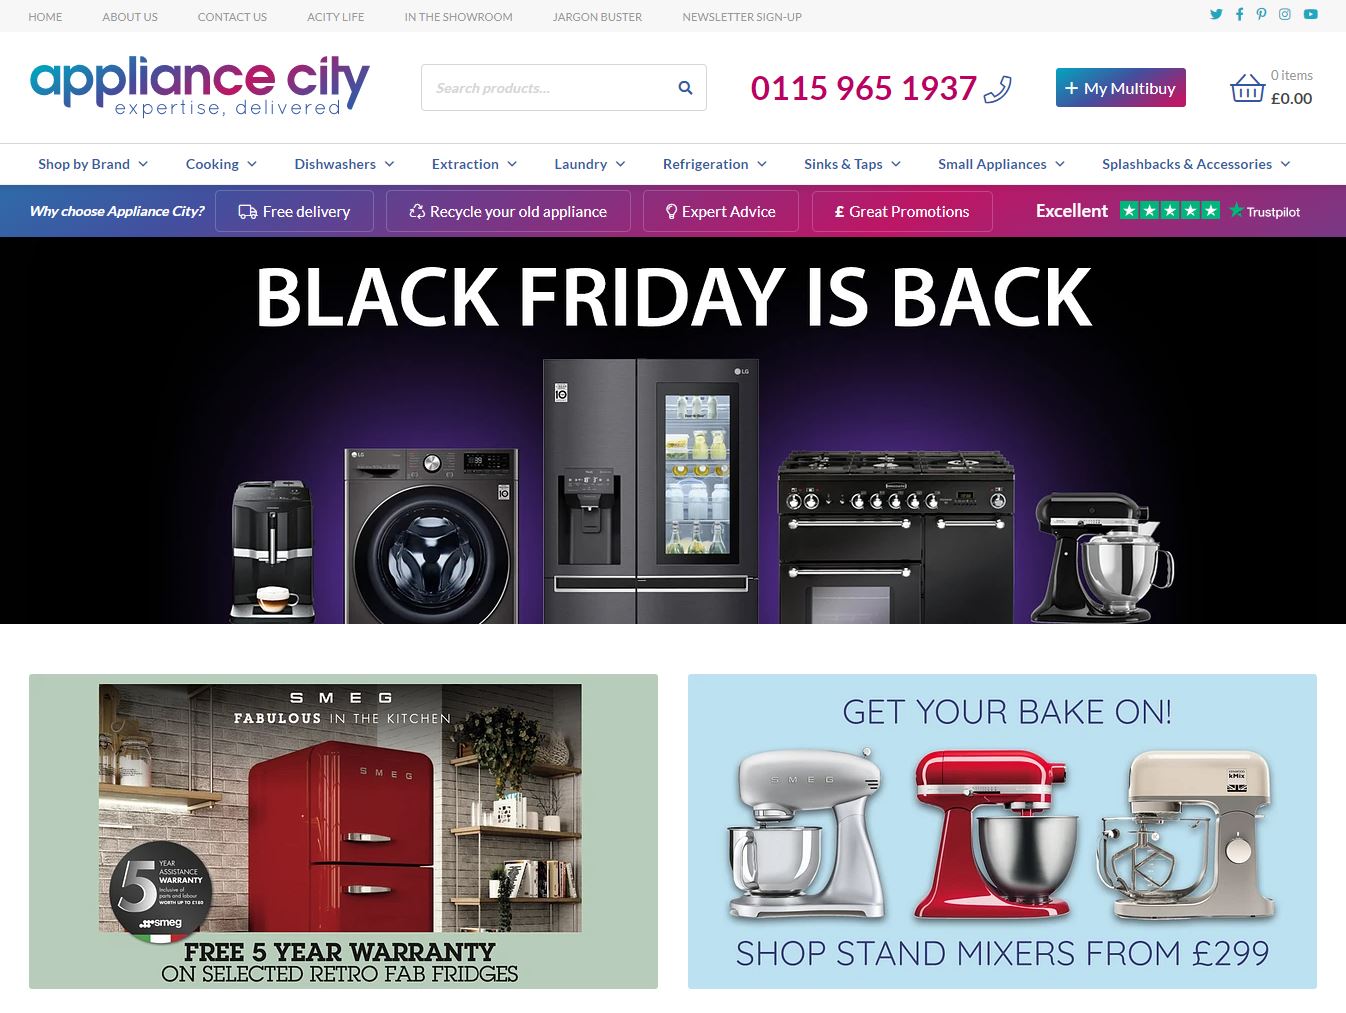 Appliance City Product Categories